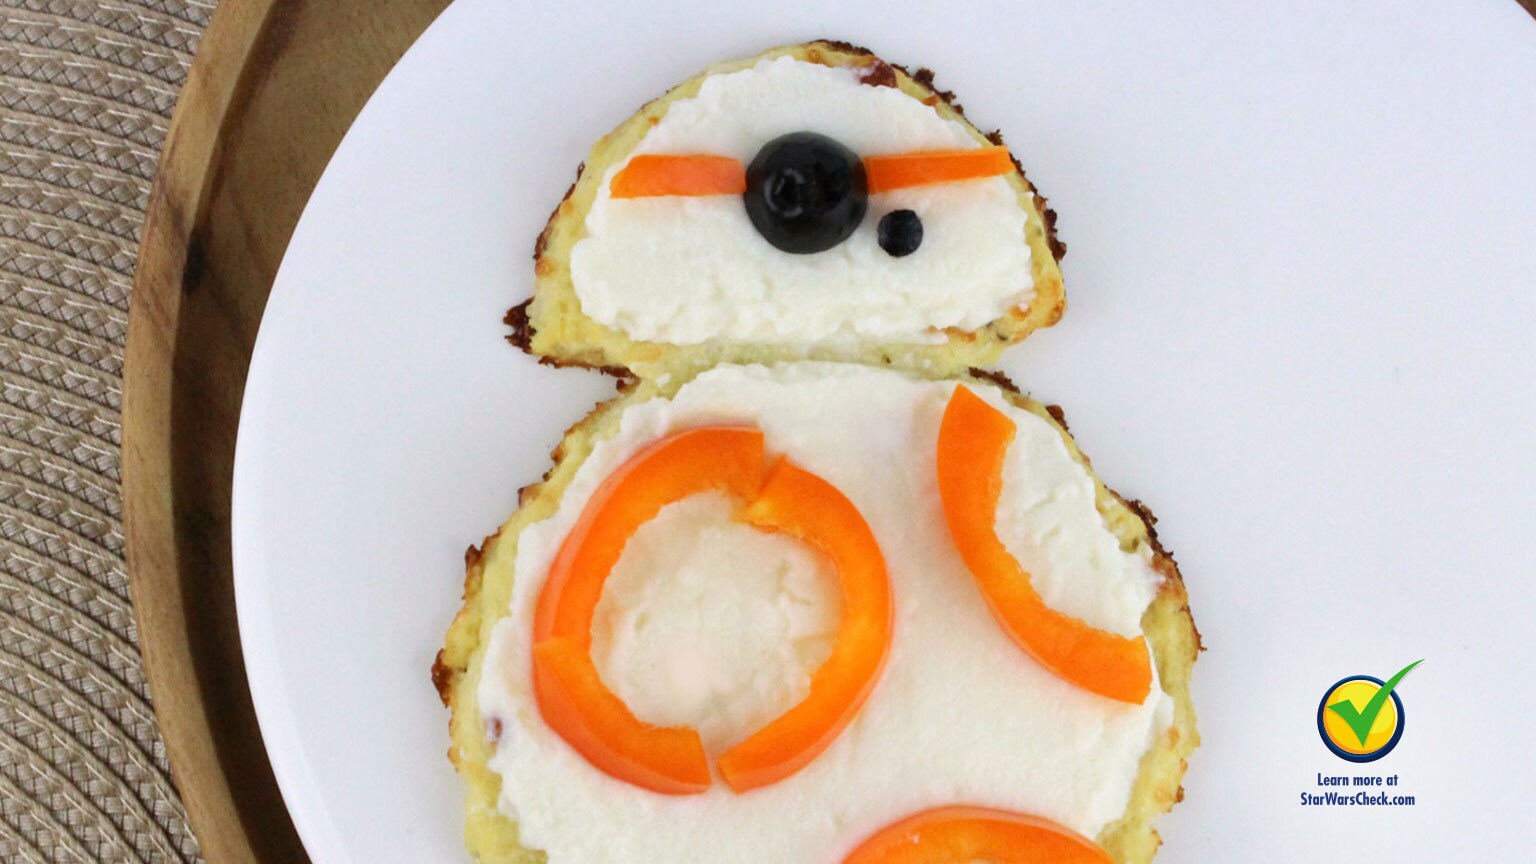 Go on a Healthy Roll With This BB-8 Cauliflower Toast